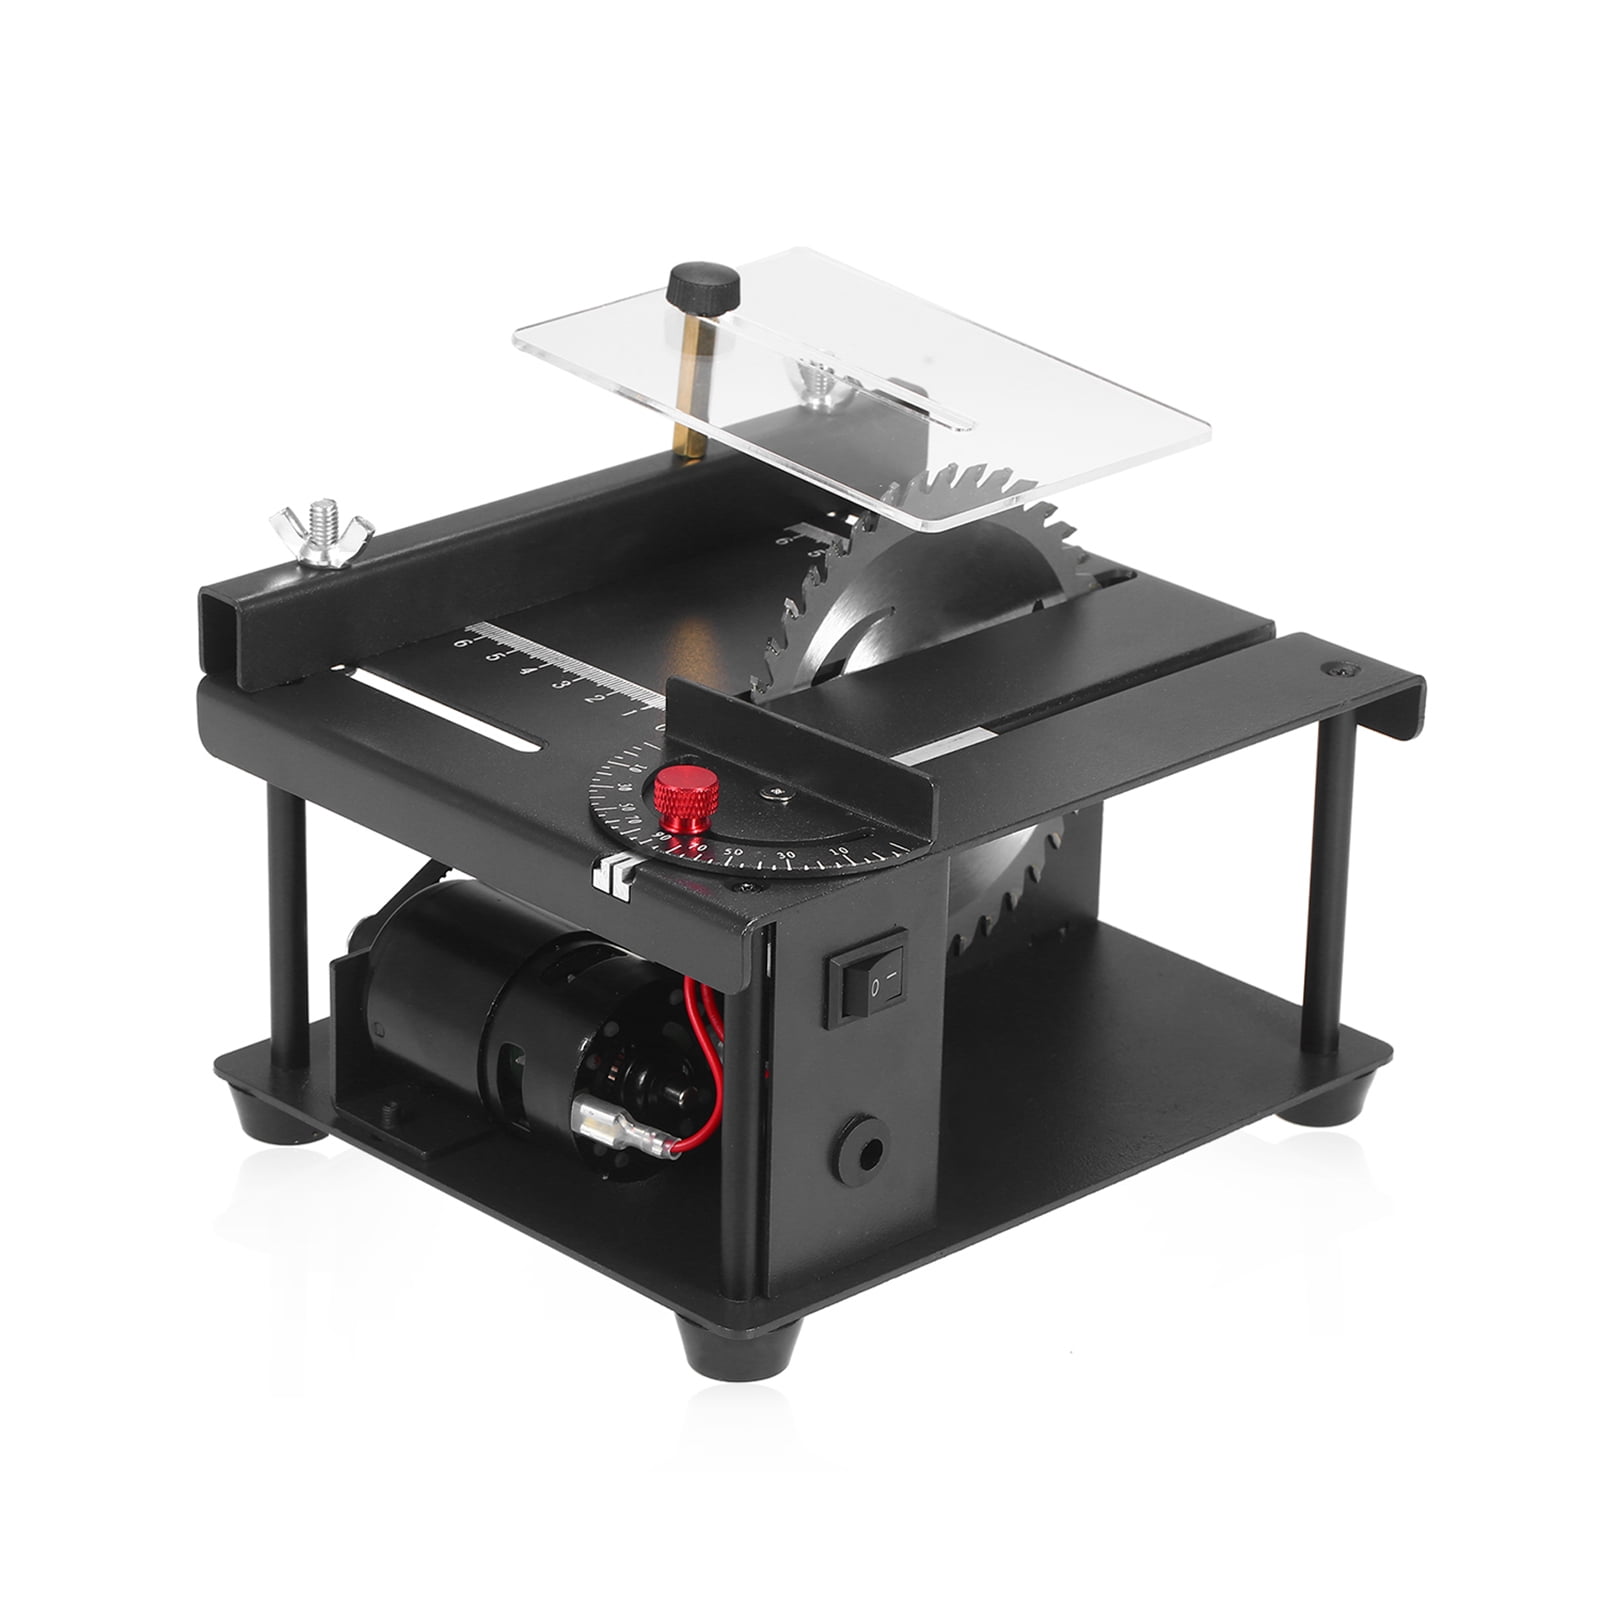 Multifunctional 10 inch Table Electric Saw Woodworking Desktop Cutting  Machine Portable Electric Sliding Table Saw Tool - AliExpress